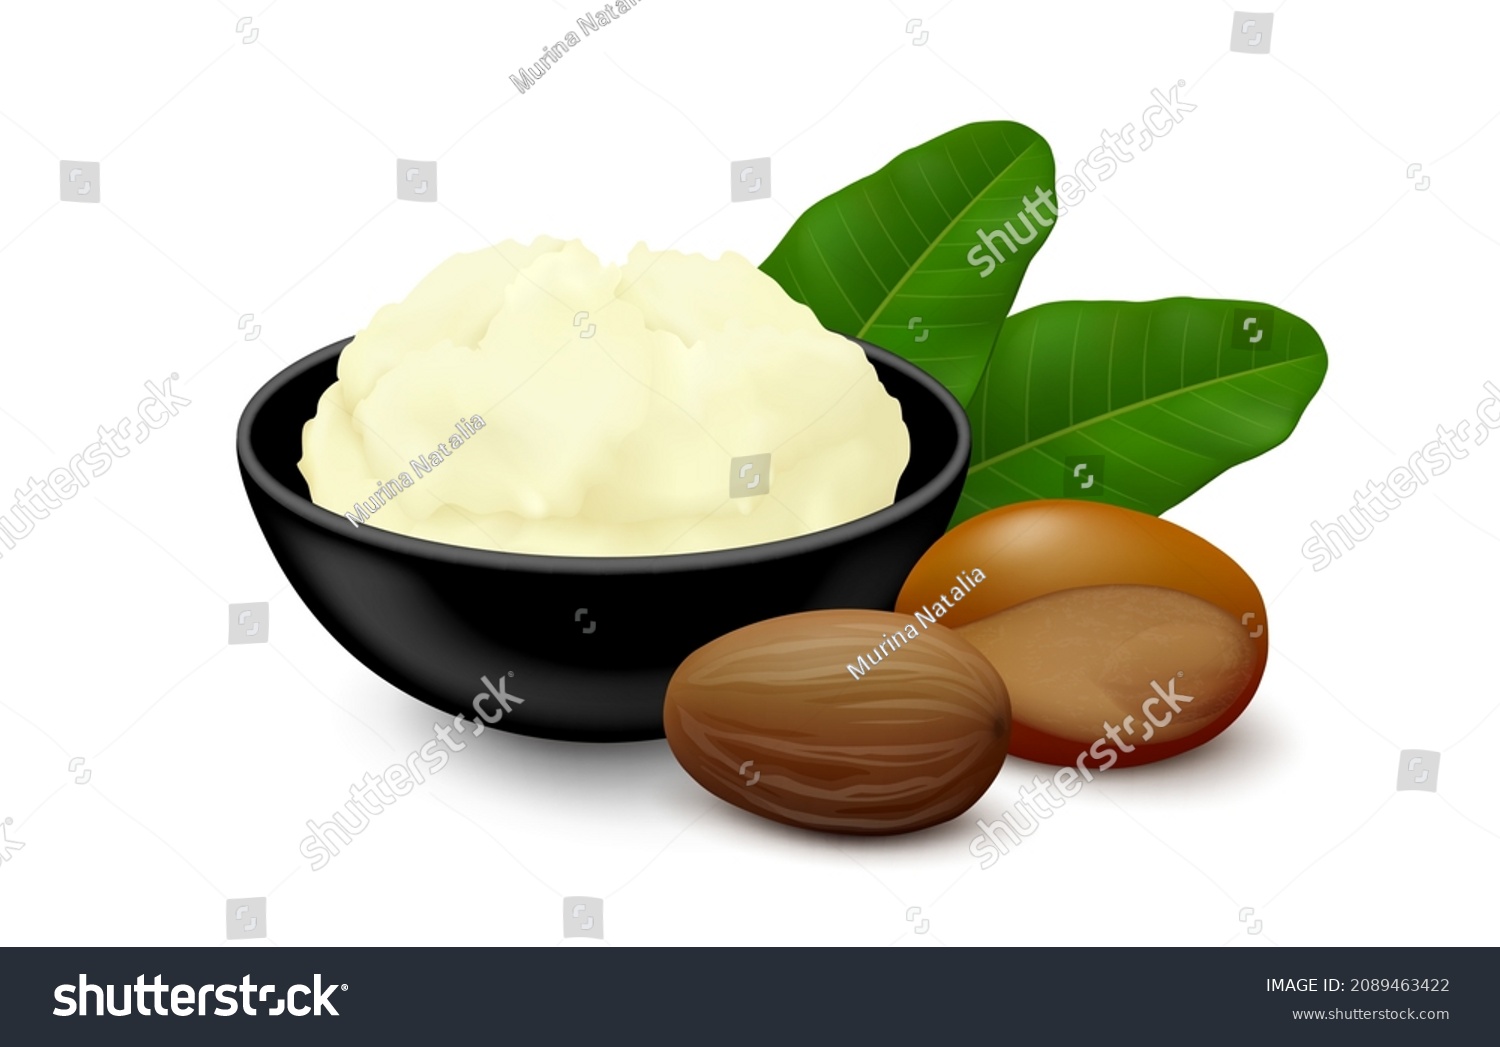 SVG of Shea (Vitellaria paradoxa) butter in a black ceramic bowl, two nuts (shelled, unshelled) and leaves isolated on white background. Side view. Realistic vector illustration. svg